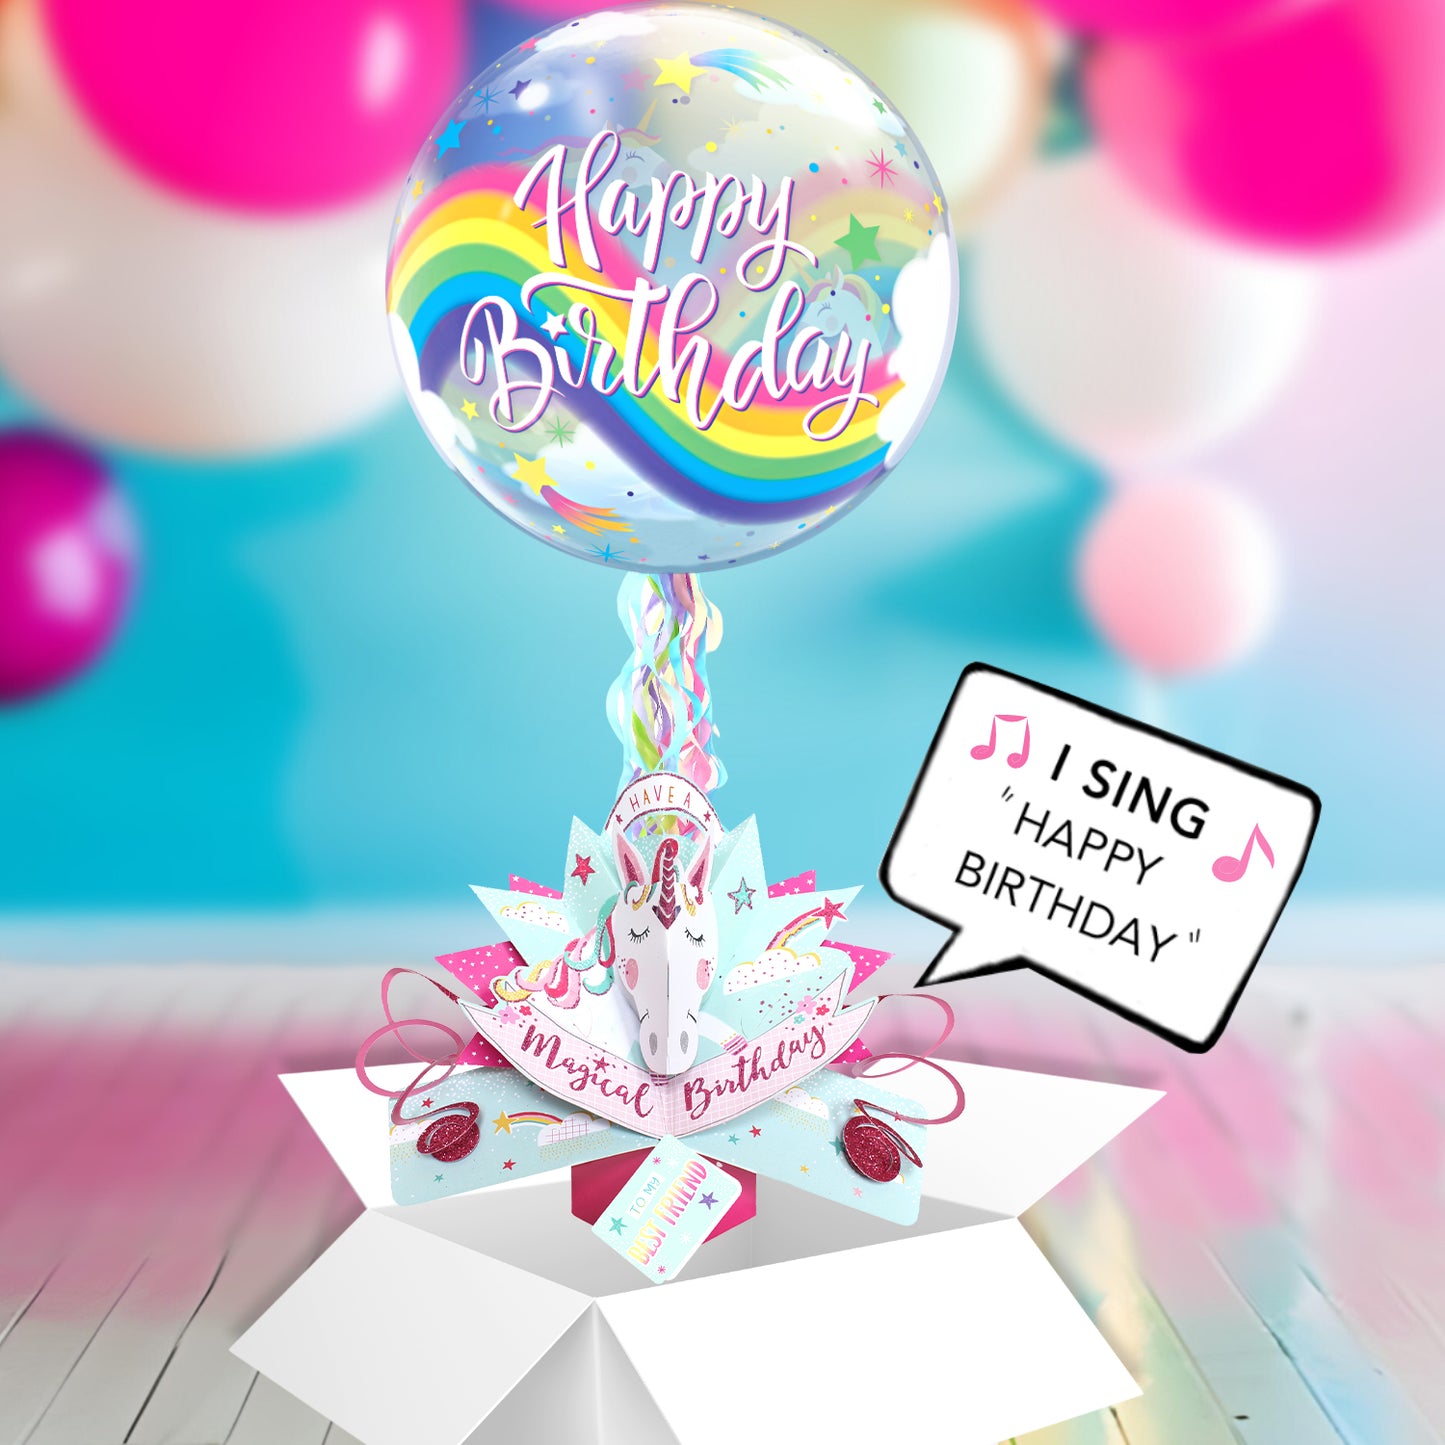 Cousin Birthday Unicorn Pop Up Card & Musical Balloon Surprise Delivered In A Box